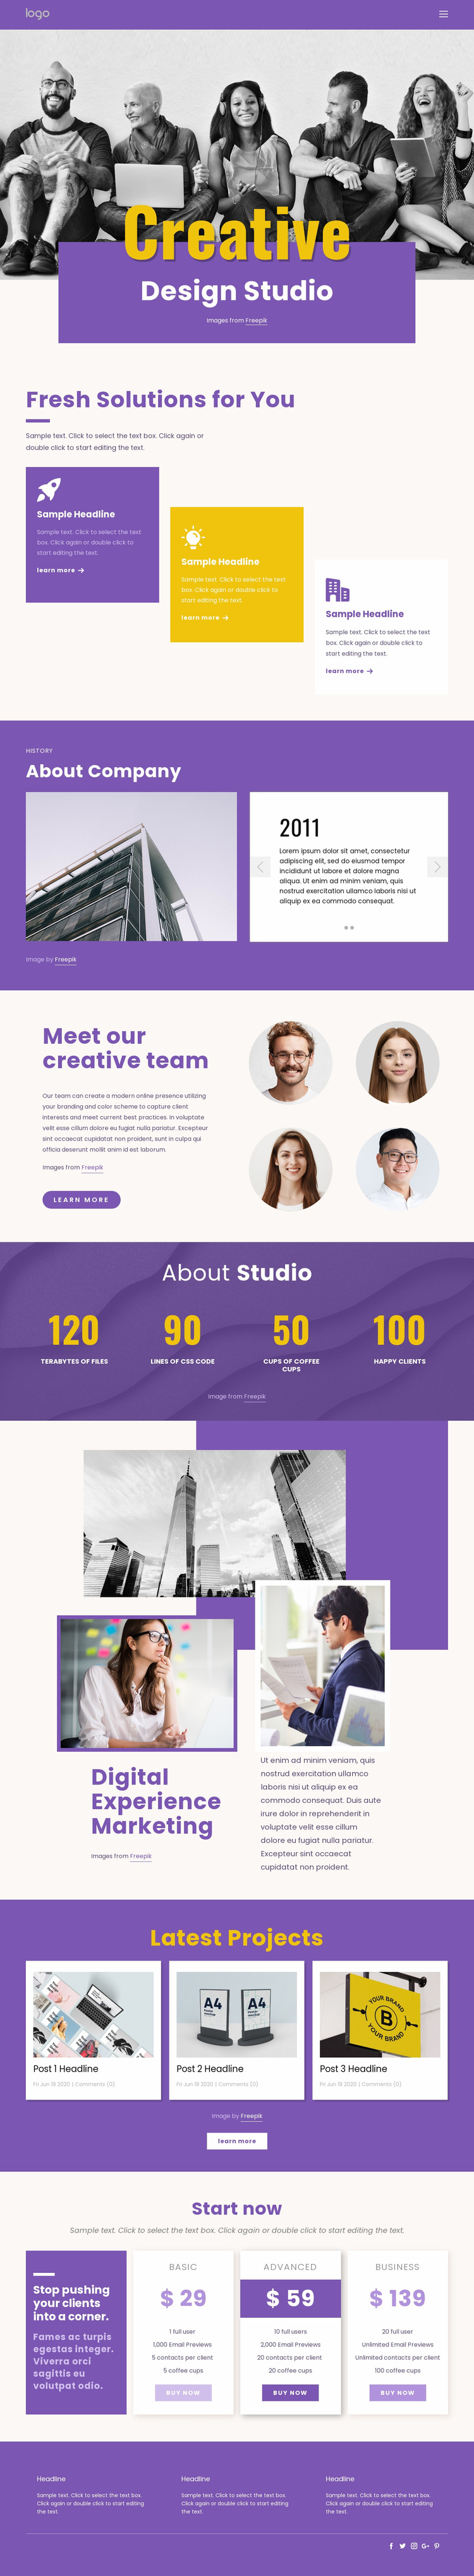 We are creative branding professionals Landing Page